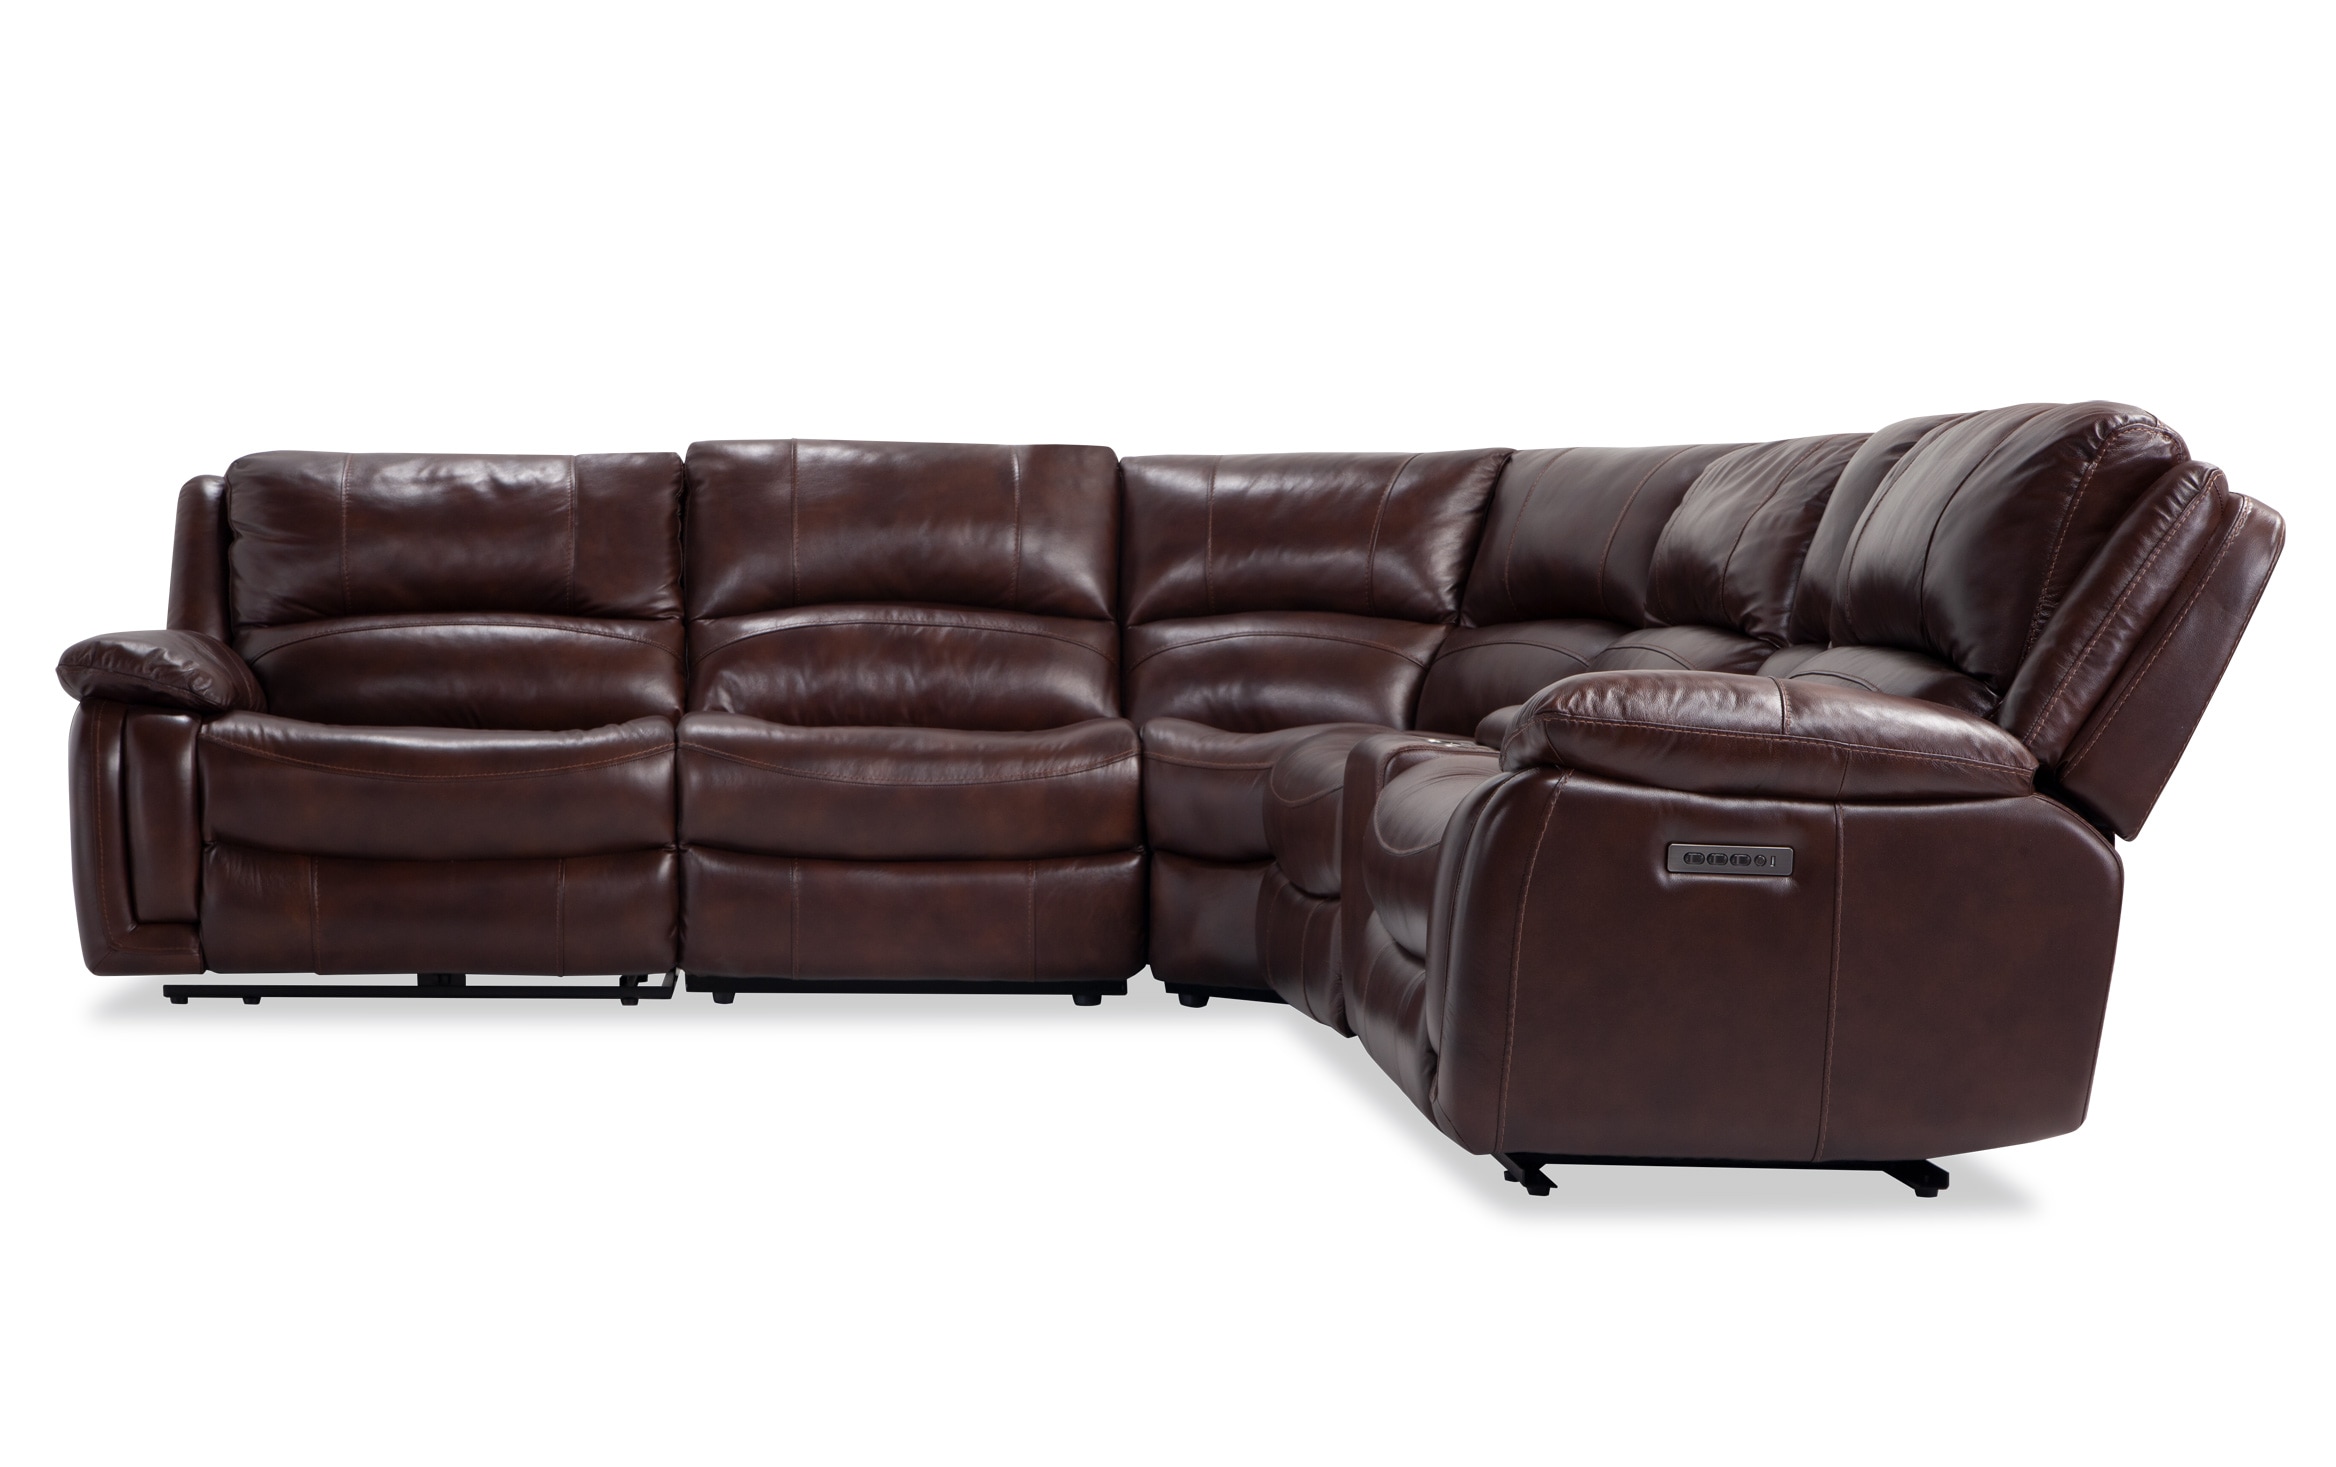 6 Piece Power Reclining Sectional, Brown Leather And Microfiber Sectional